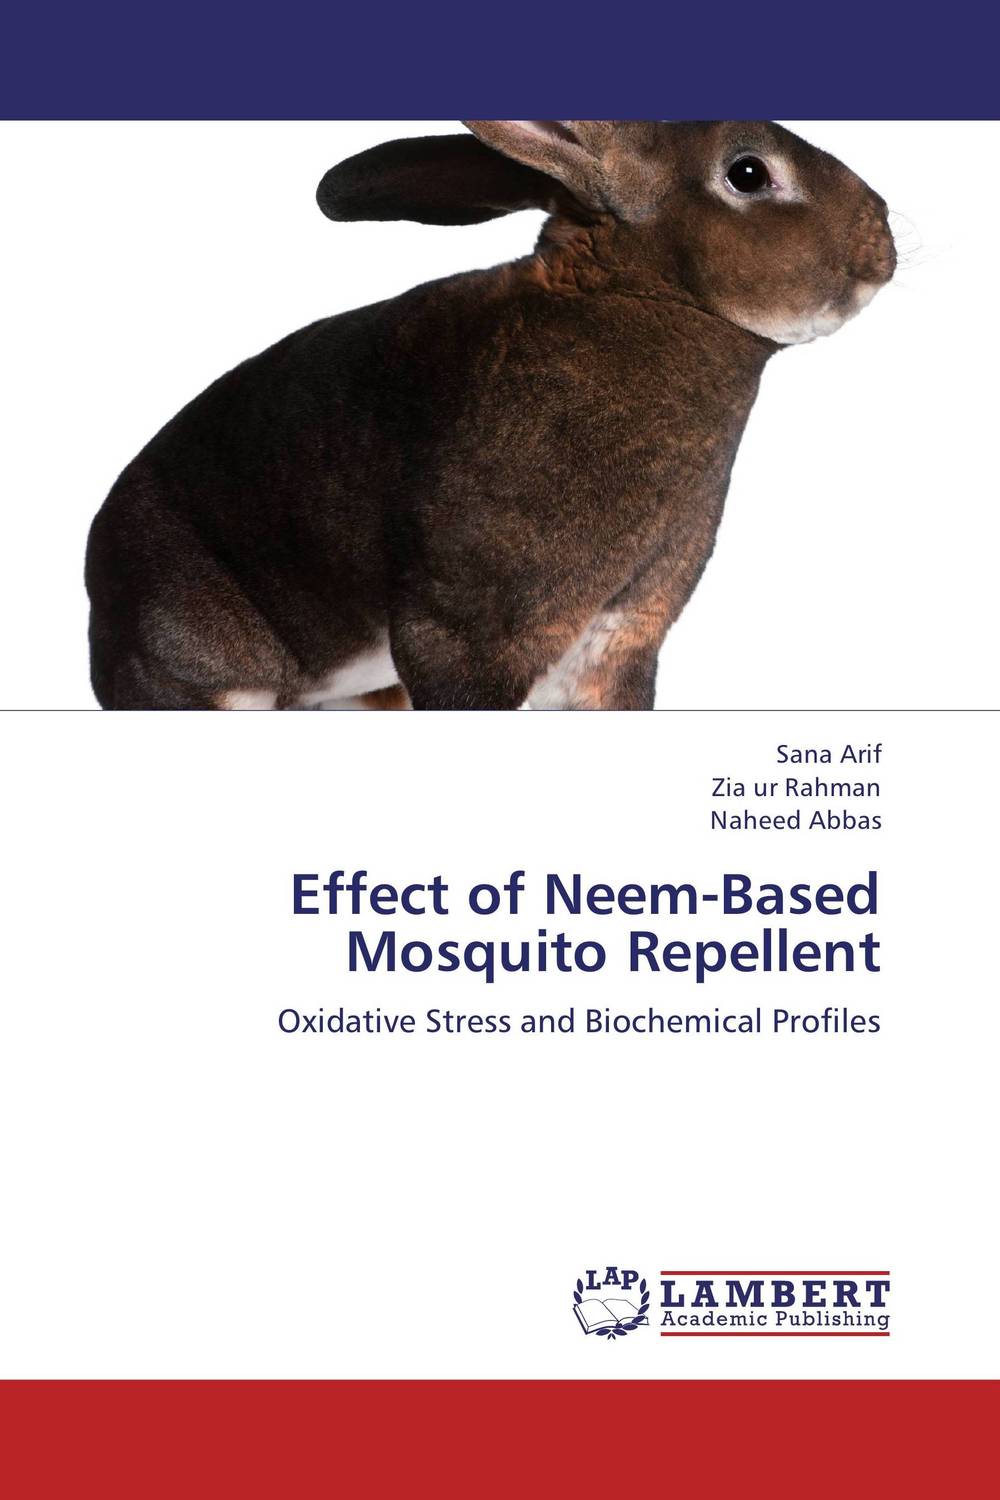 Effect of Neem-Based Mosquito Repellent